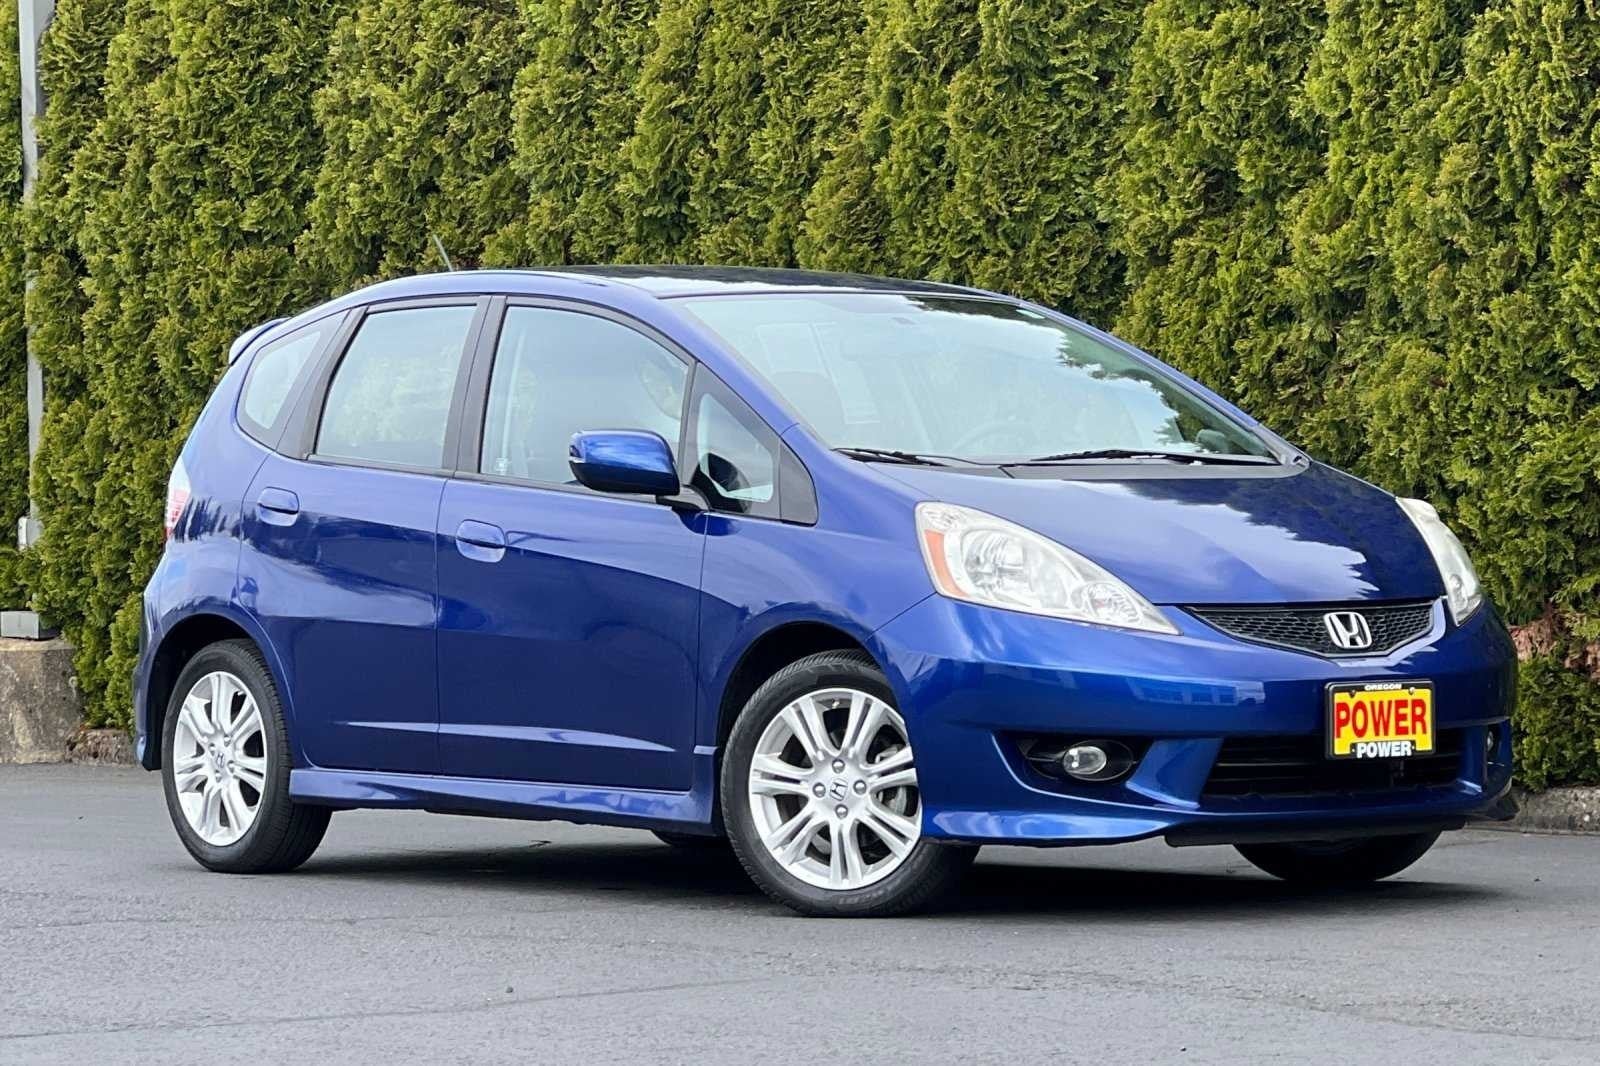 Used 2010 Honda Fit Sport with VIN JHMGE8G4XAS013723 for sale in Sublimity, OR